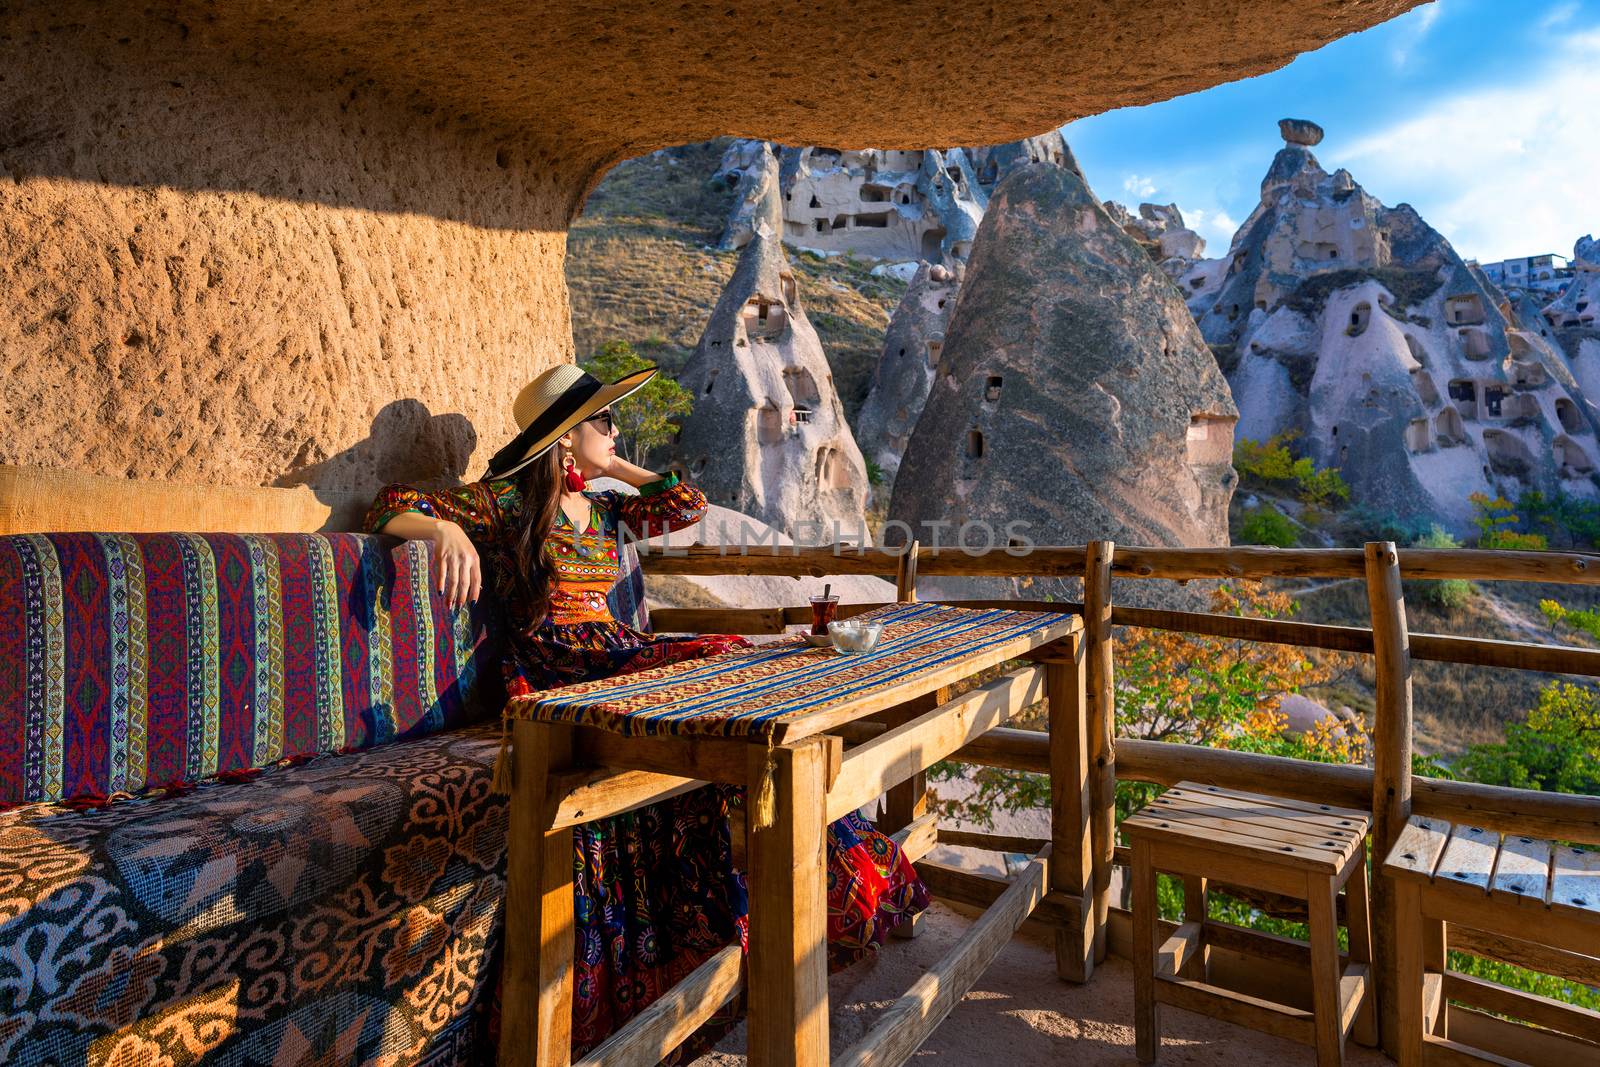 Woman in Bohemian dress sitting on traditional cave house in Cappadocia, Turkey. by gutarphotoghaphy